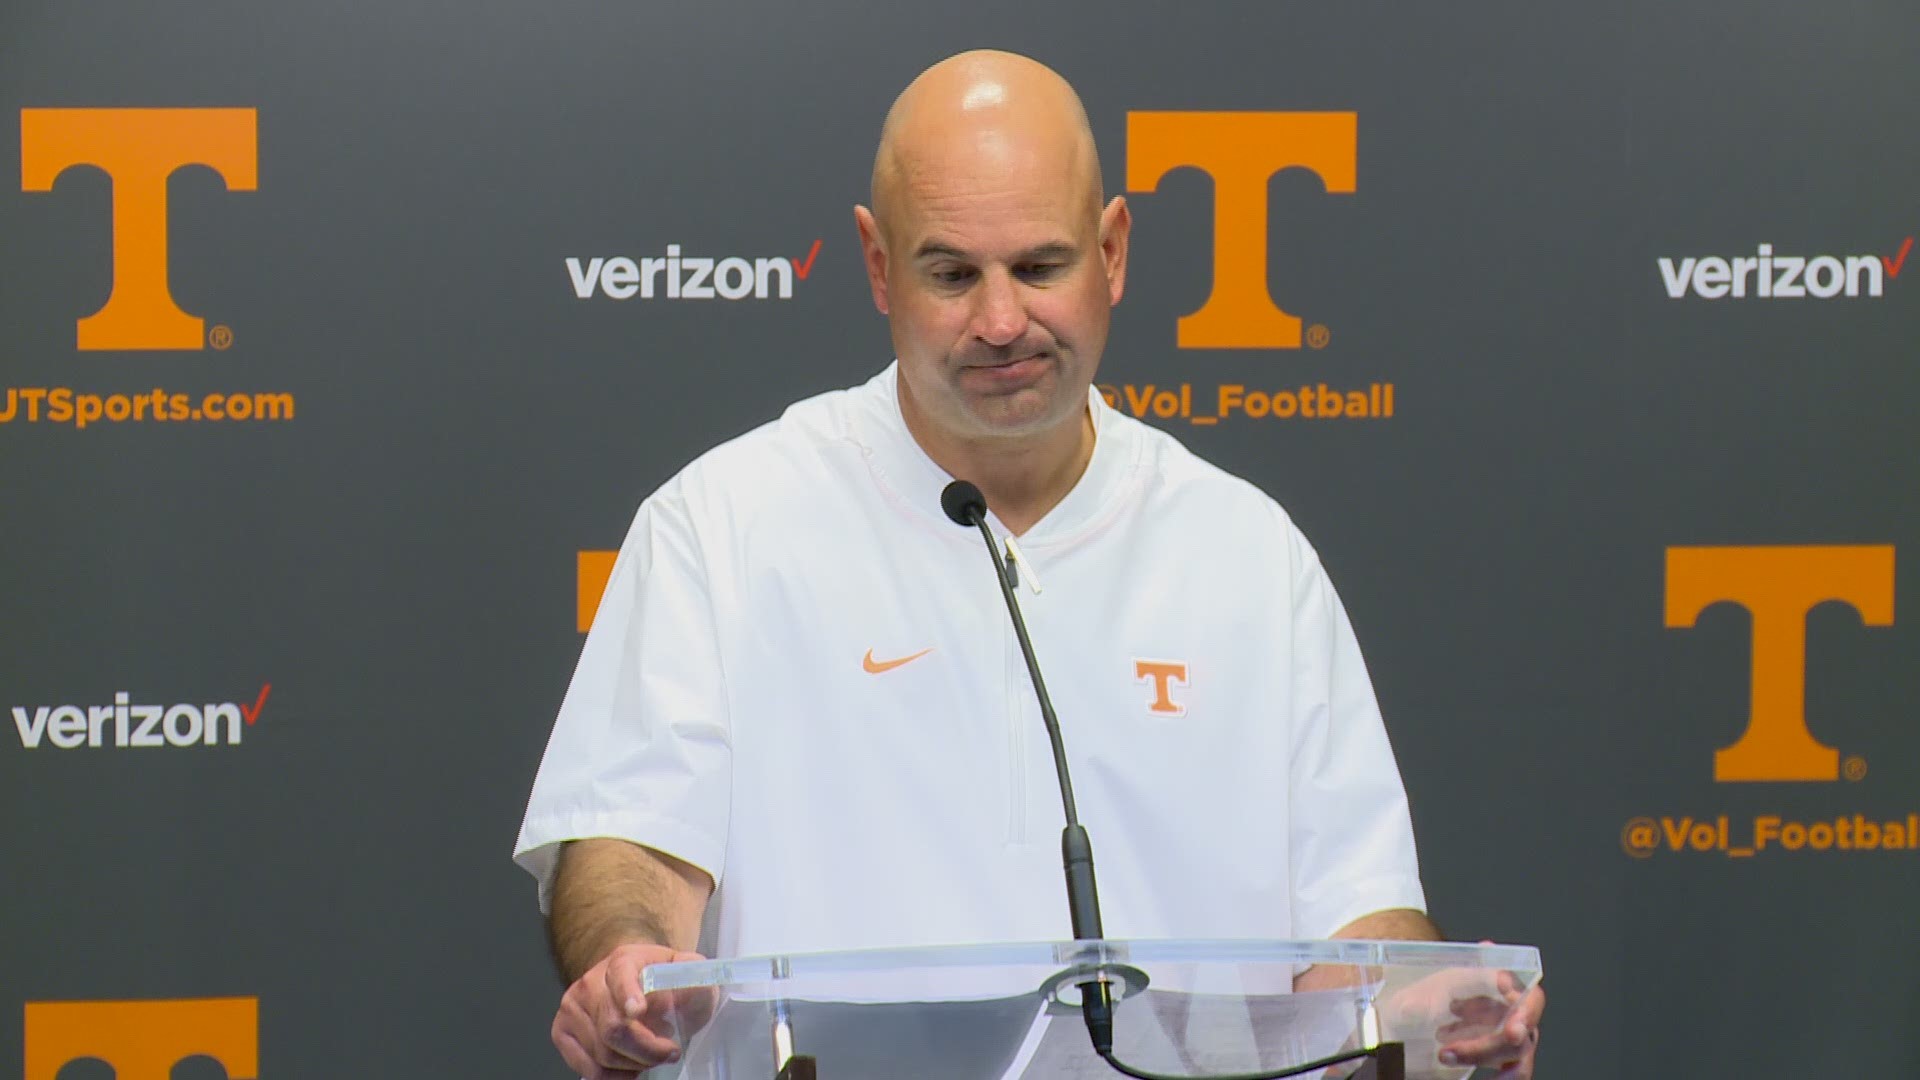 Pruitt says his team has to show more poise.